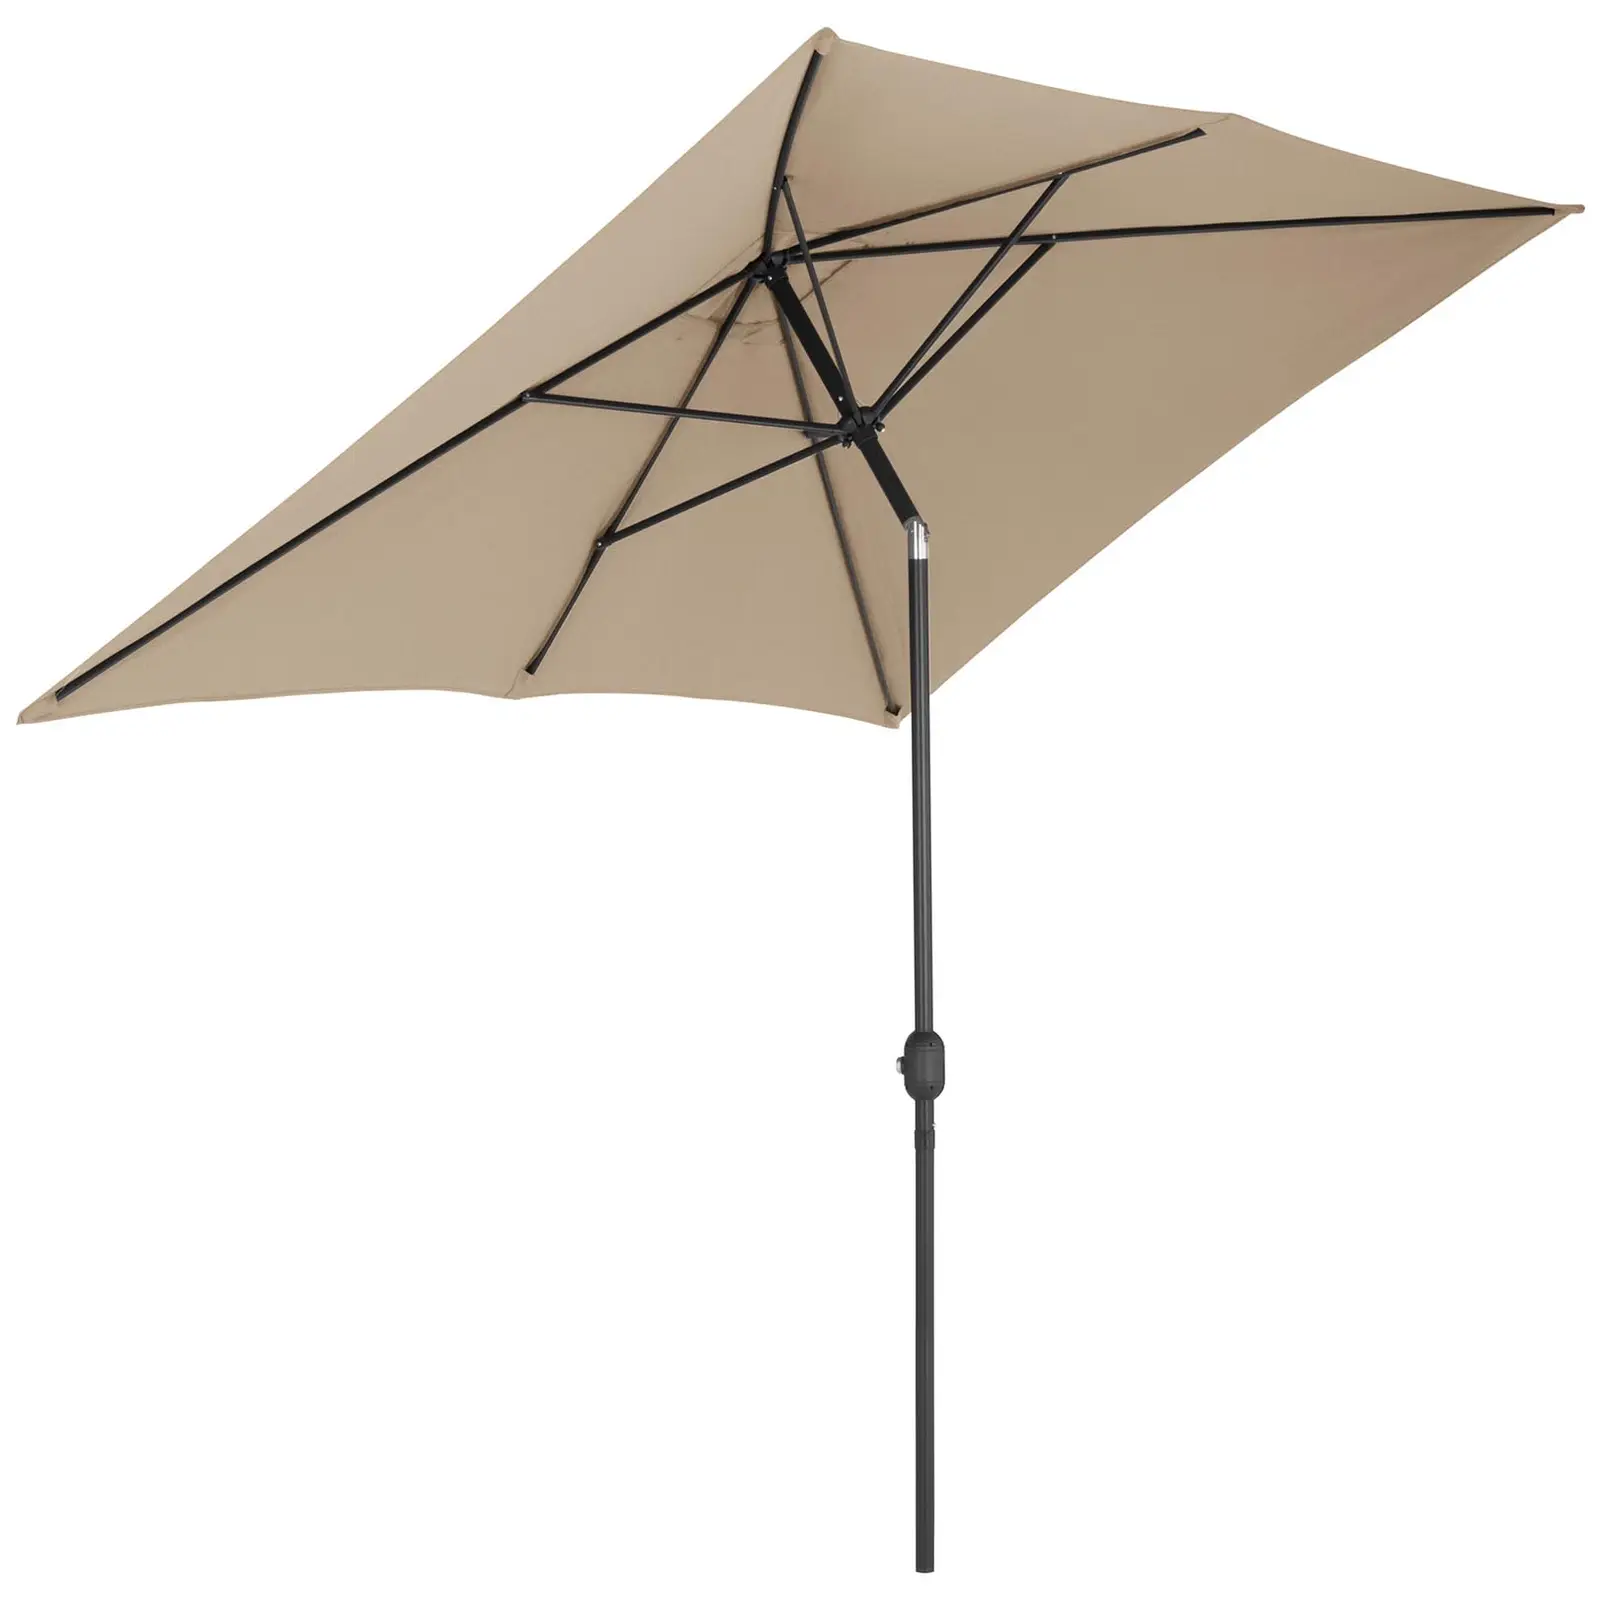 Occasion Grand parasol - Taupe - Rectangulaire - 200 x 300 cm - Inclinable